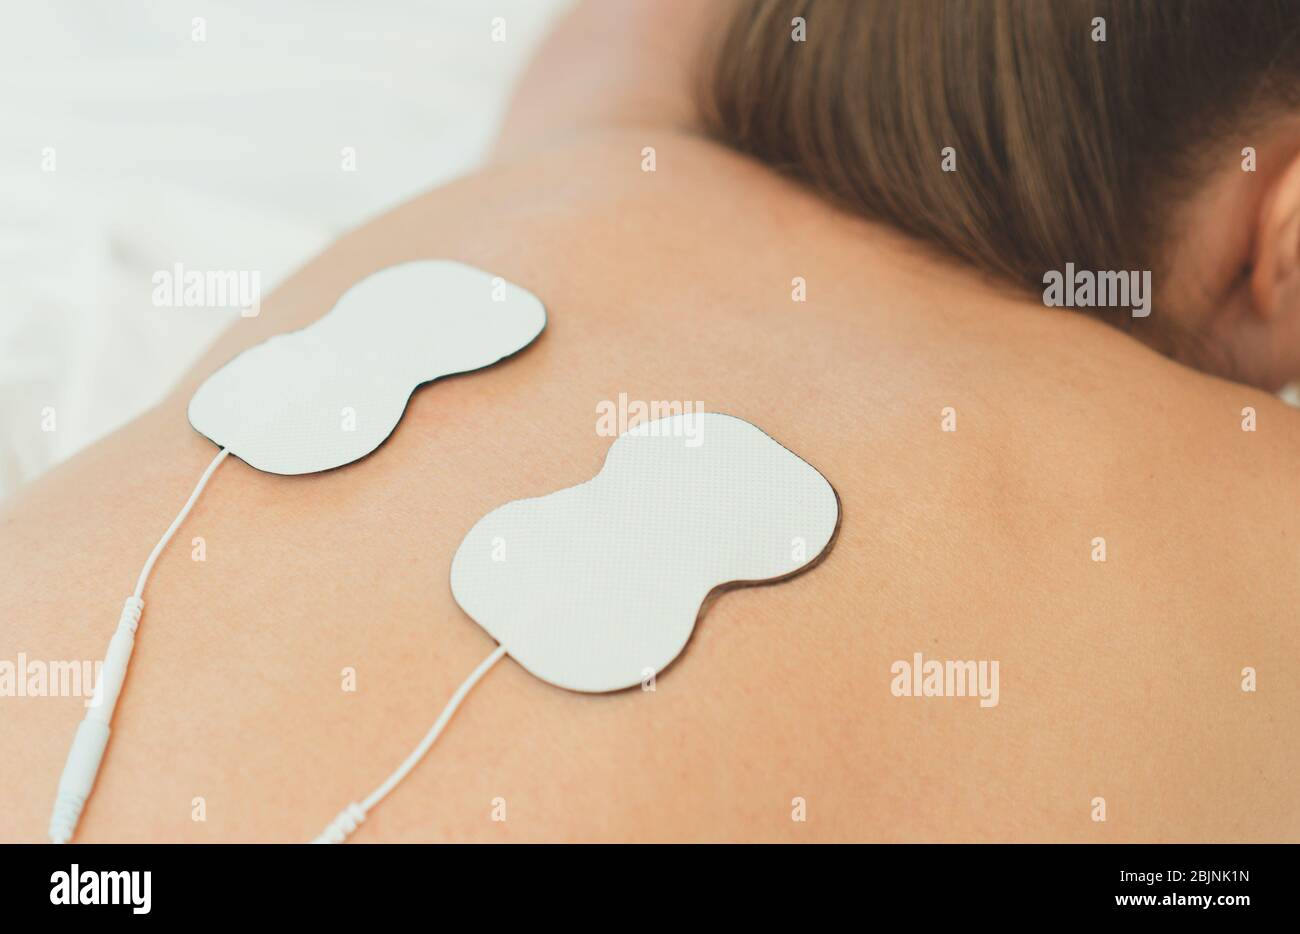 Woman body with electrodes on her back. Electrical muscle stimulation. Stock Photo